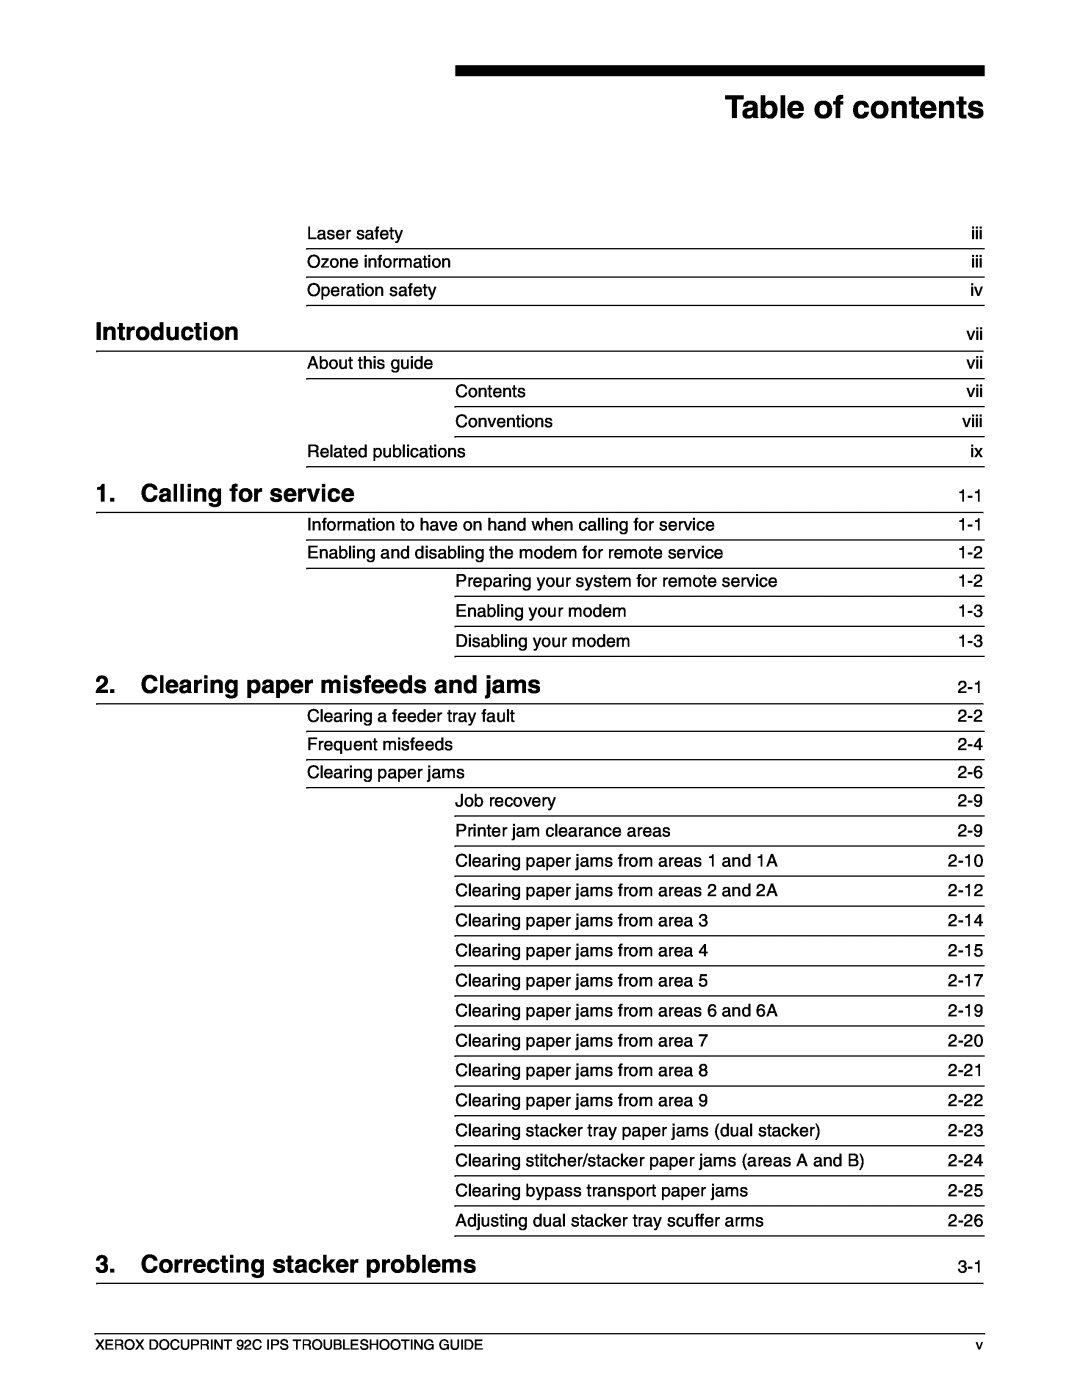 Xerox 92C IPS manual Table of contents, Introduction, Calling for service, Clearing paper misfeeds and jams 